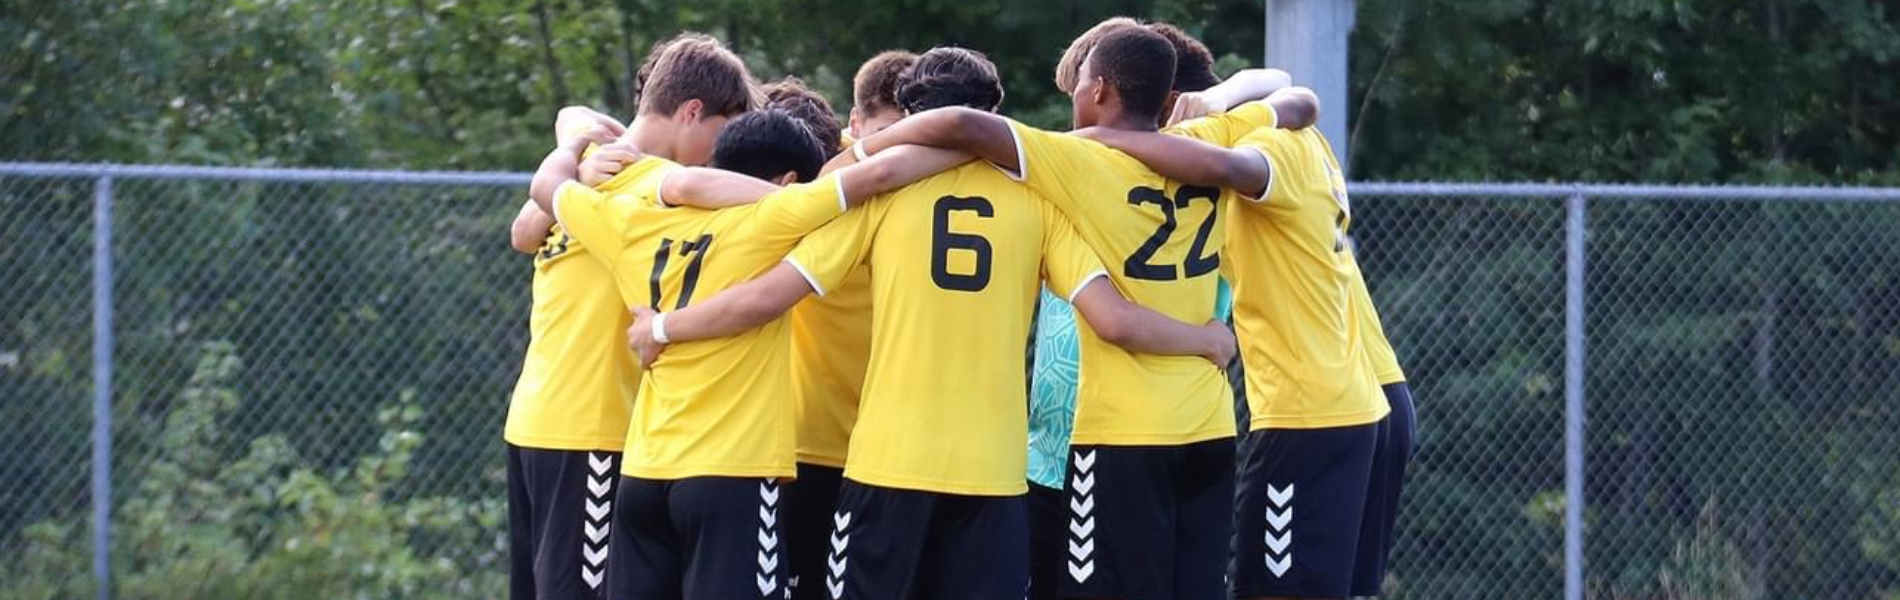 Young soccer players huddled with their arms around each other wearing their yellow jerseys. 